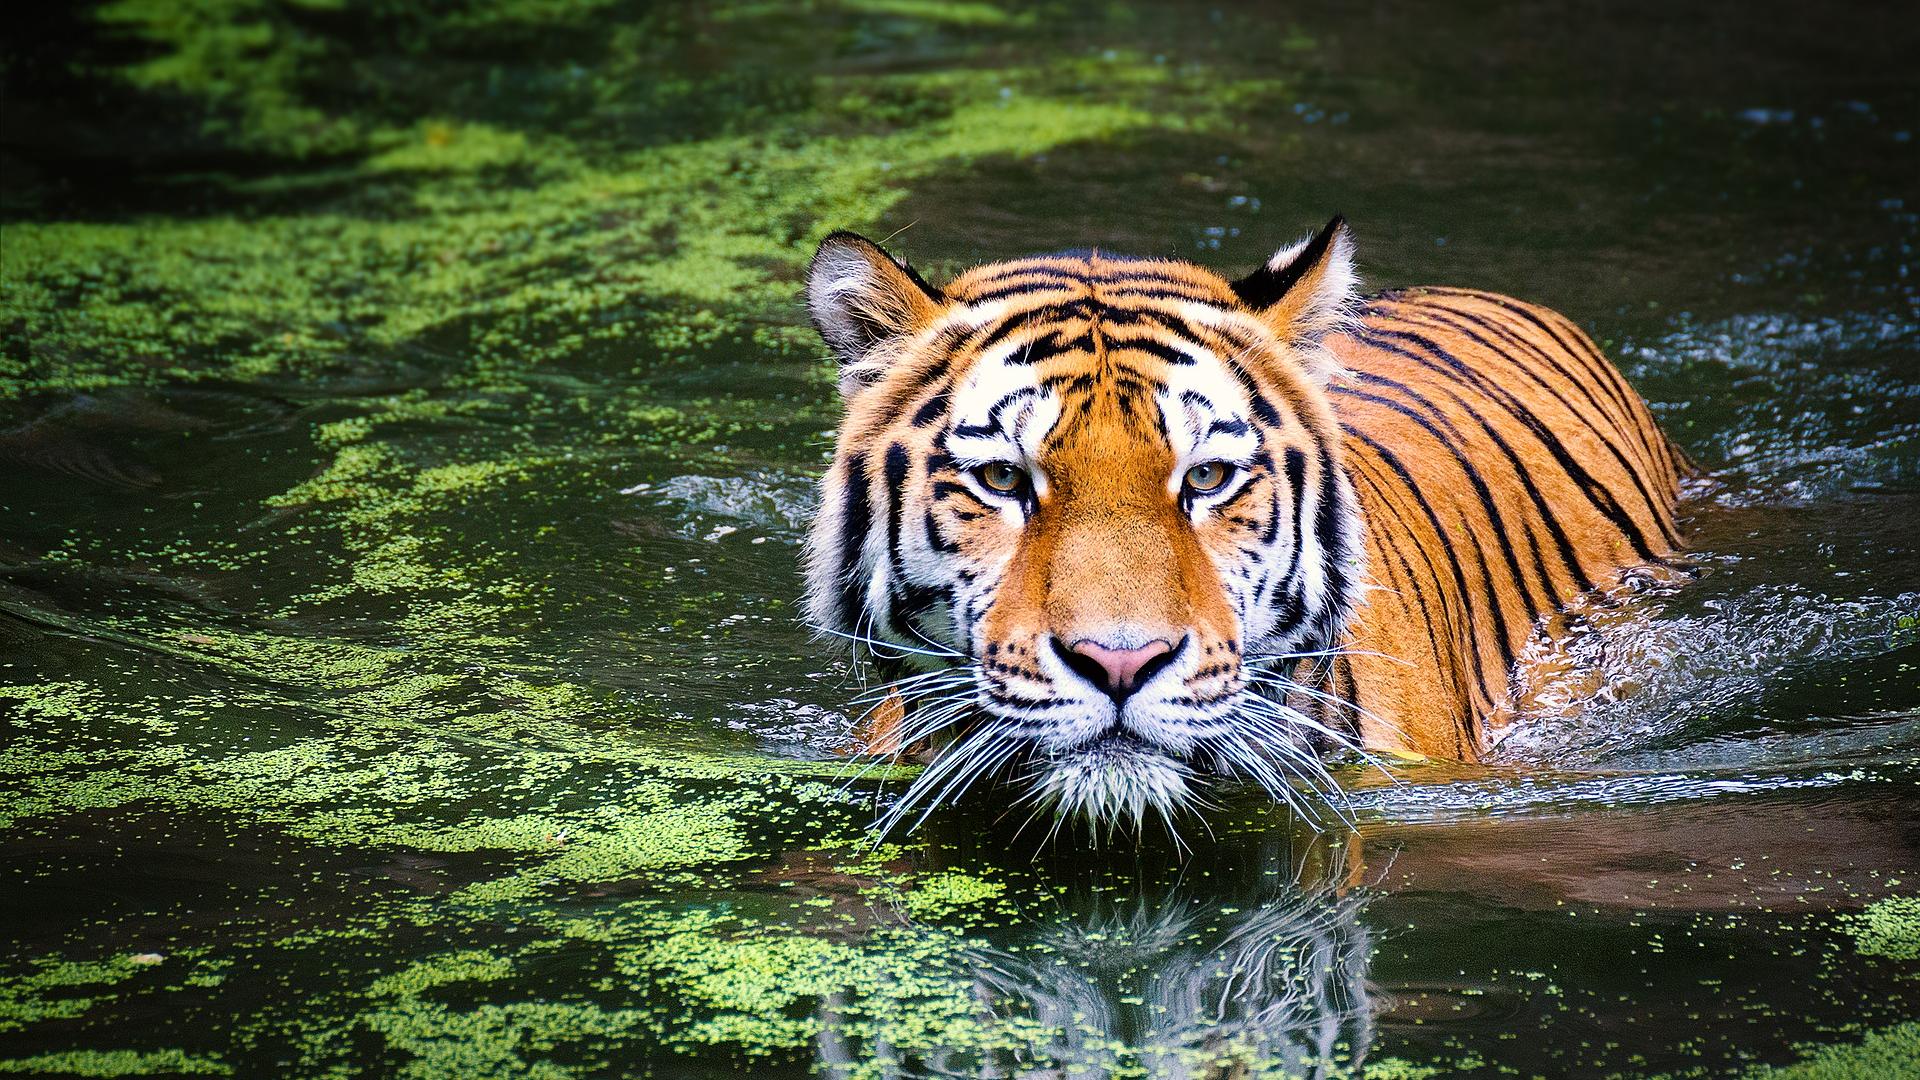 Tiger wading in weed covered lake